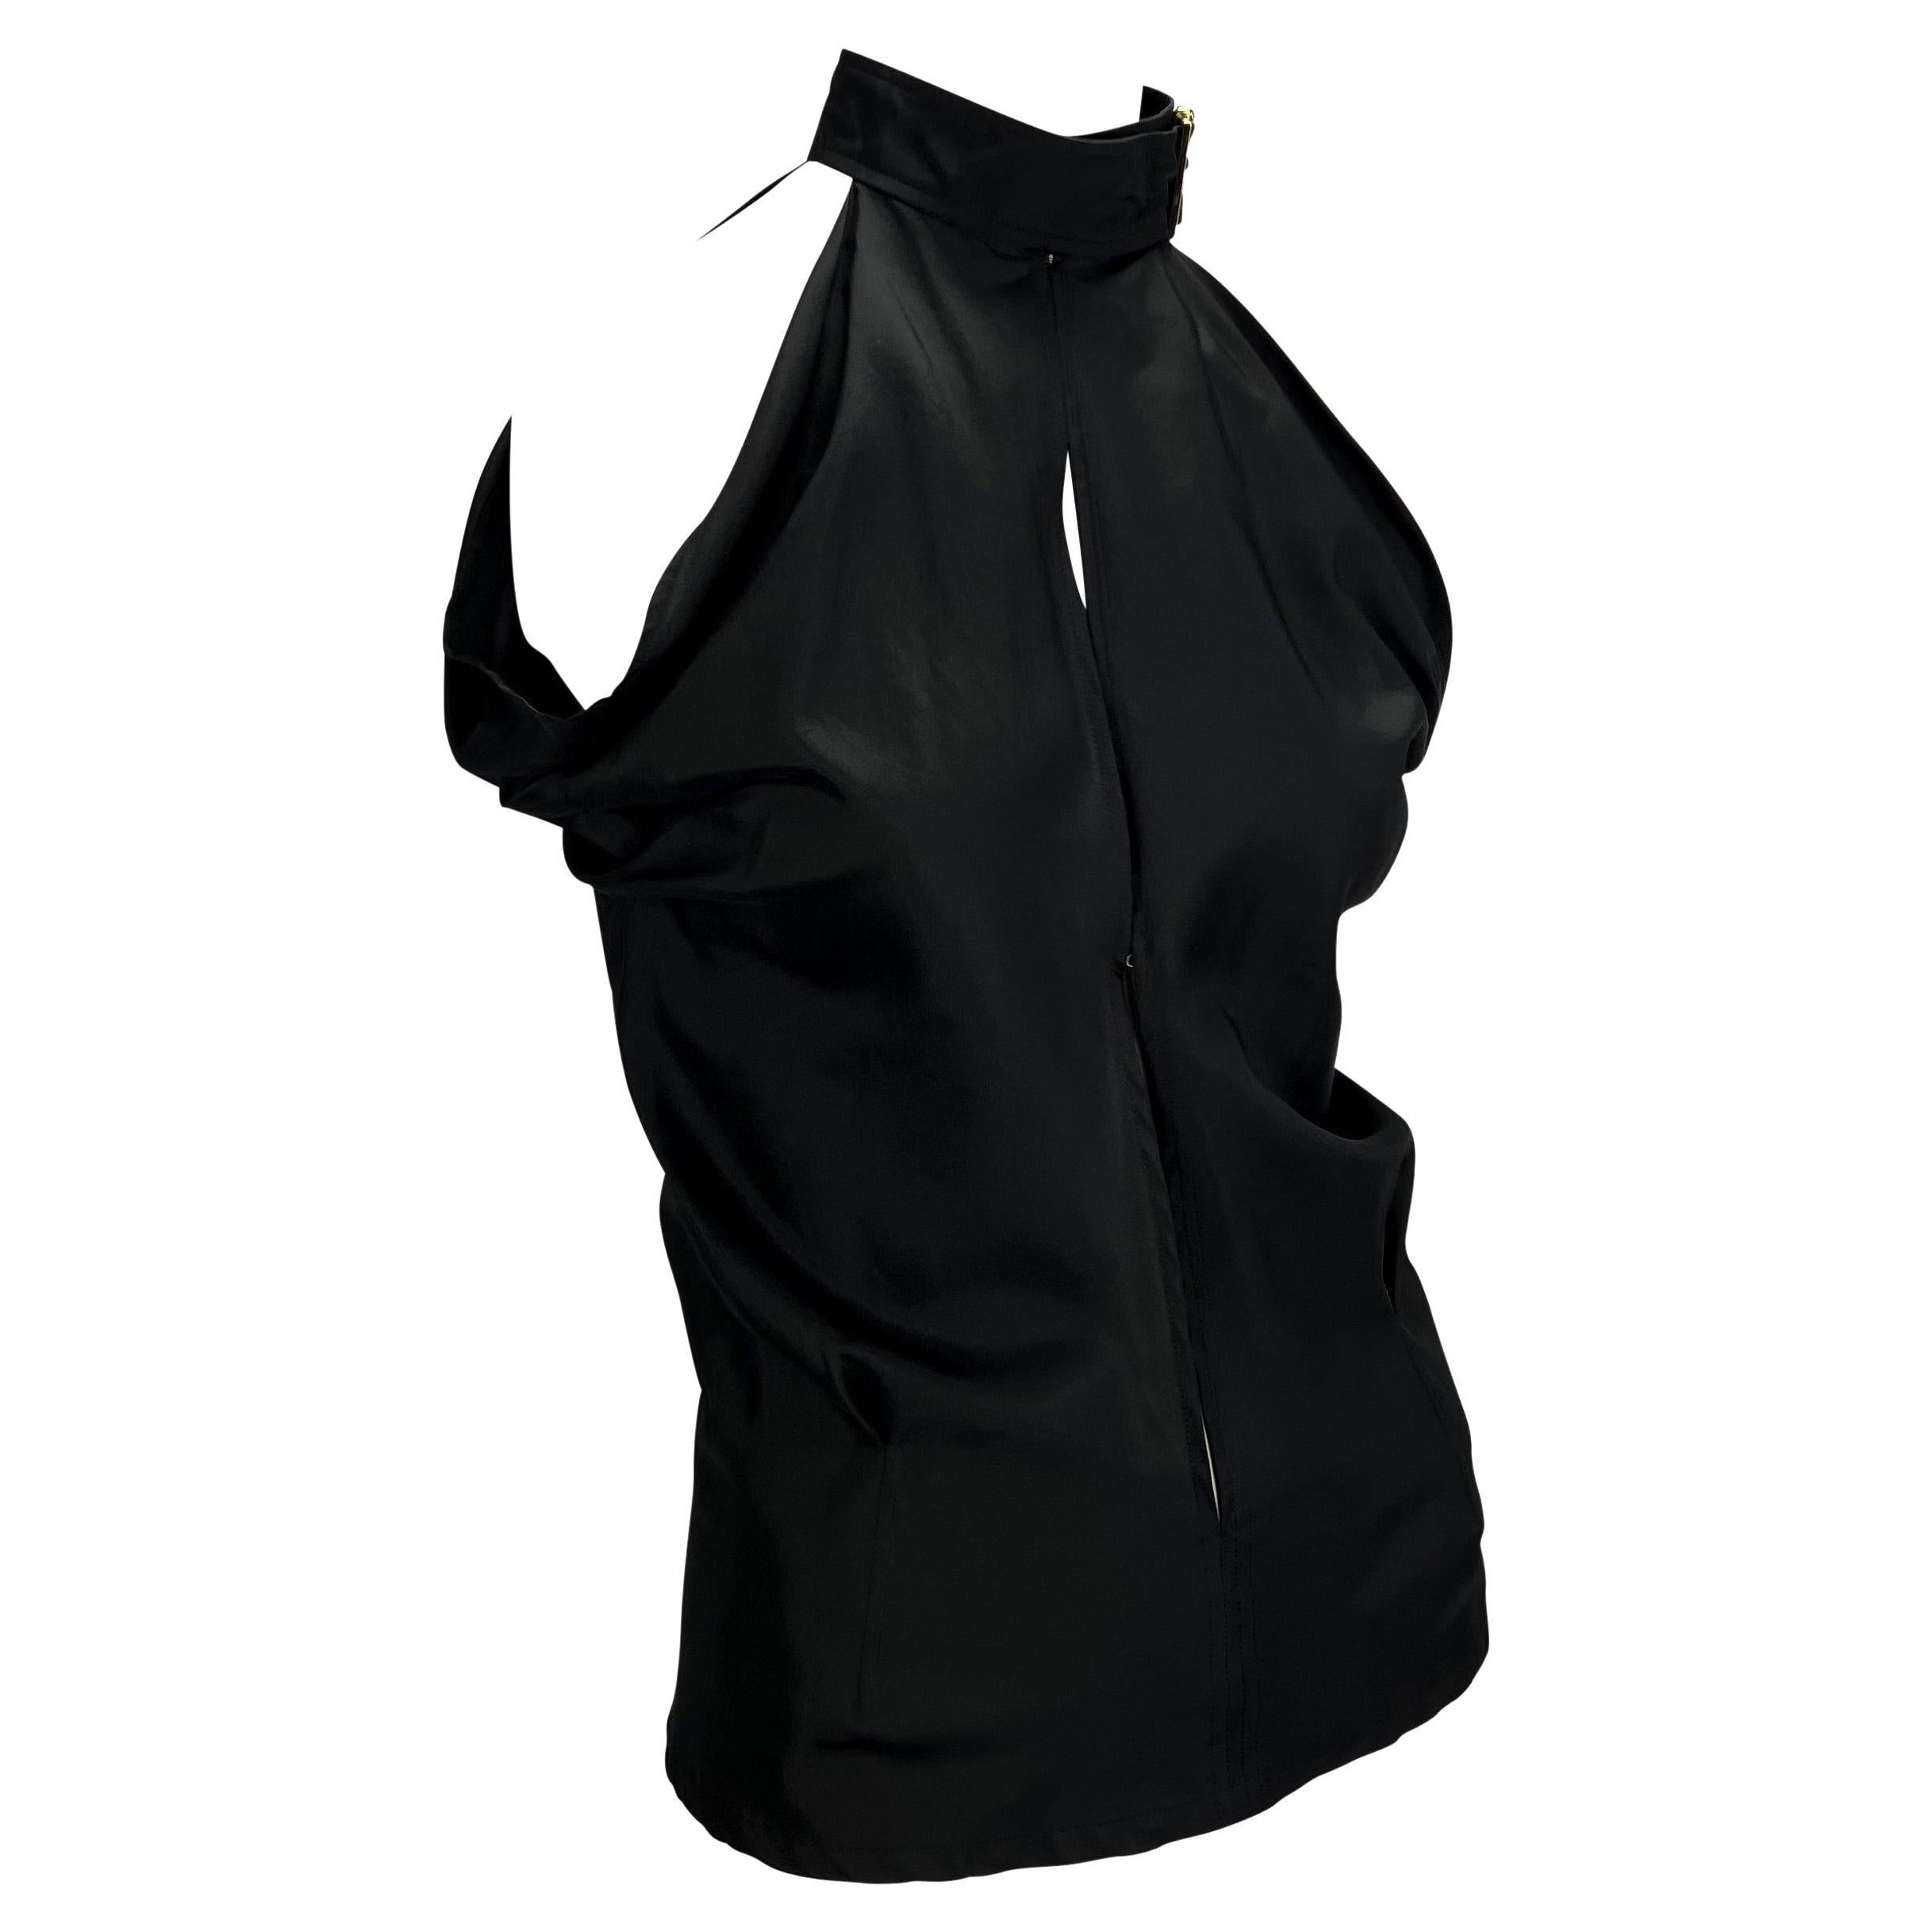 S/S 2001 Yves Saint Laurent by Tom Ford Plunge Black Silk Sleeveless Buckle Top For Sale 2